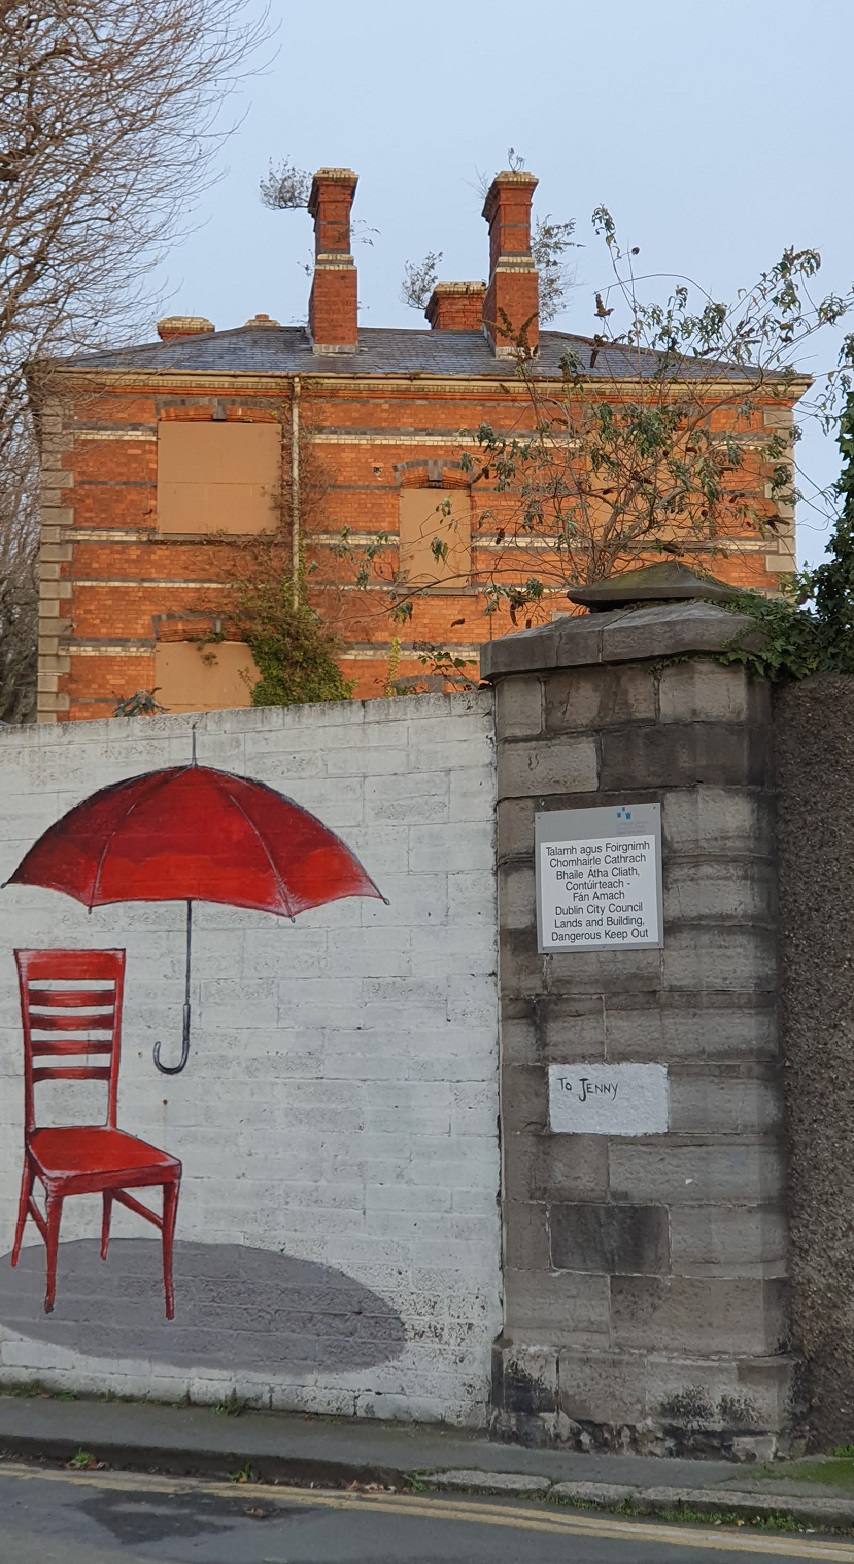 Street mural depicting a red chair underneath a red umbrella in the foreground and derelict building in Stoneybatter